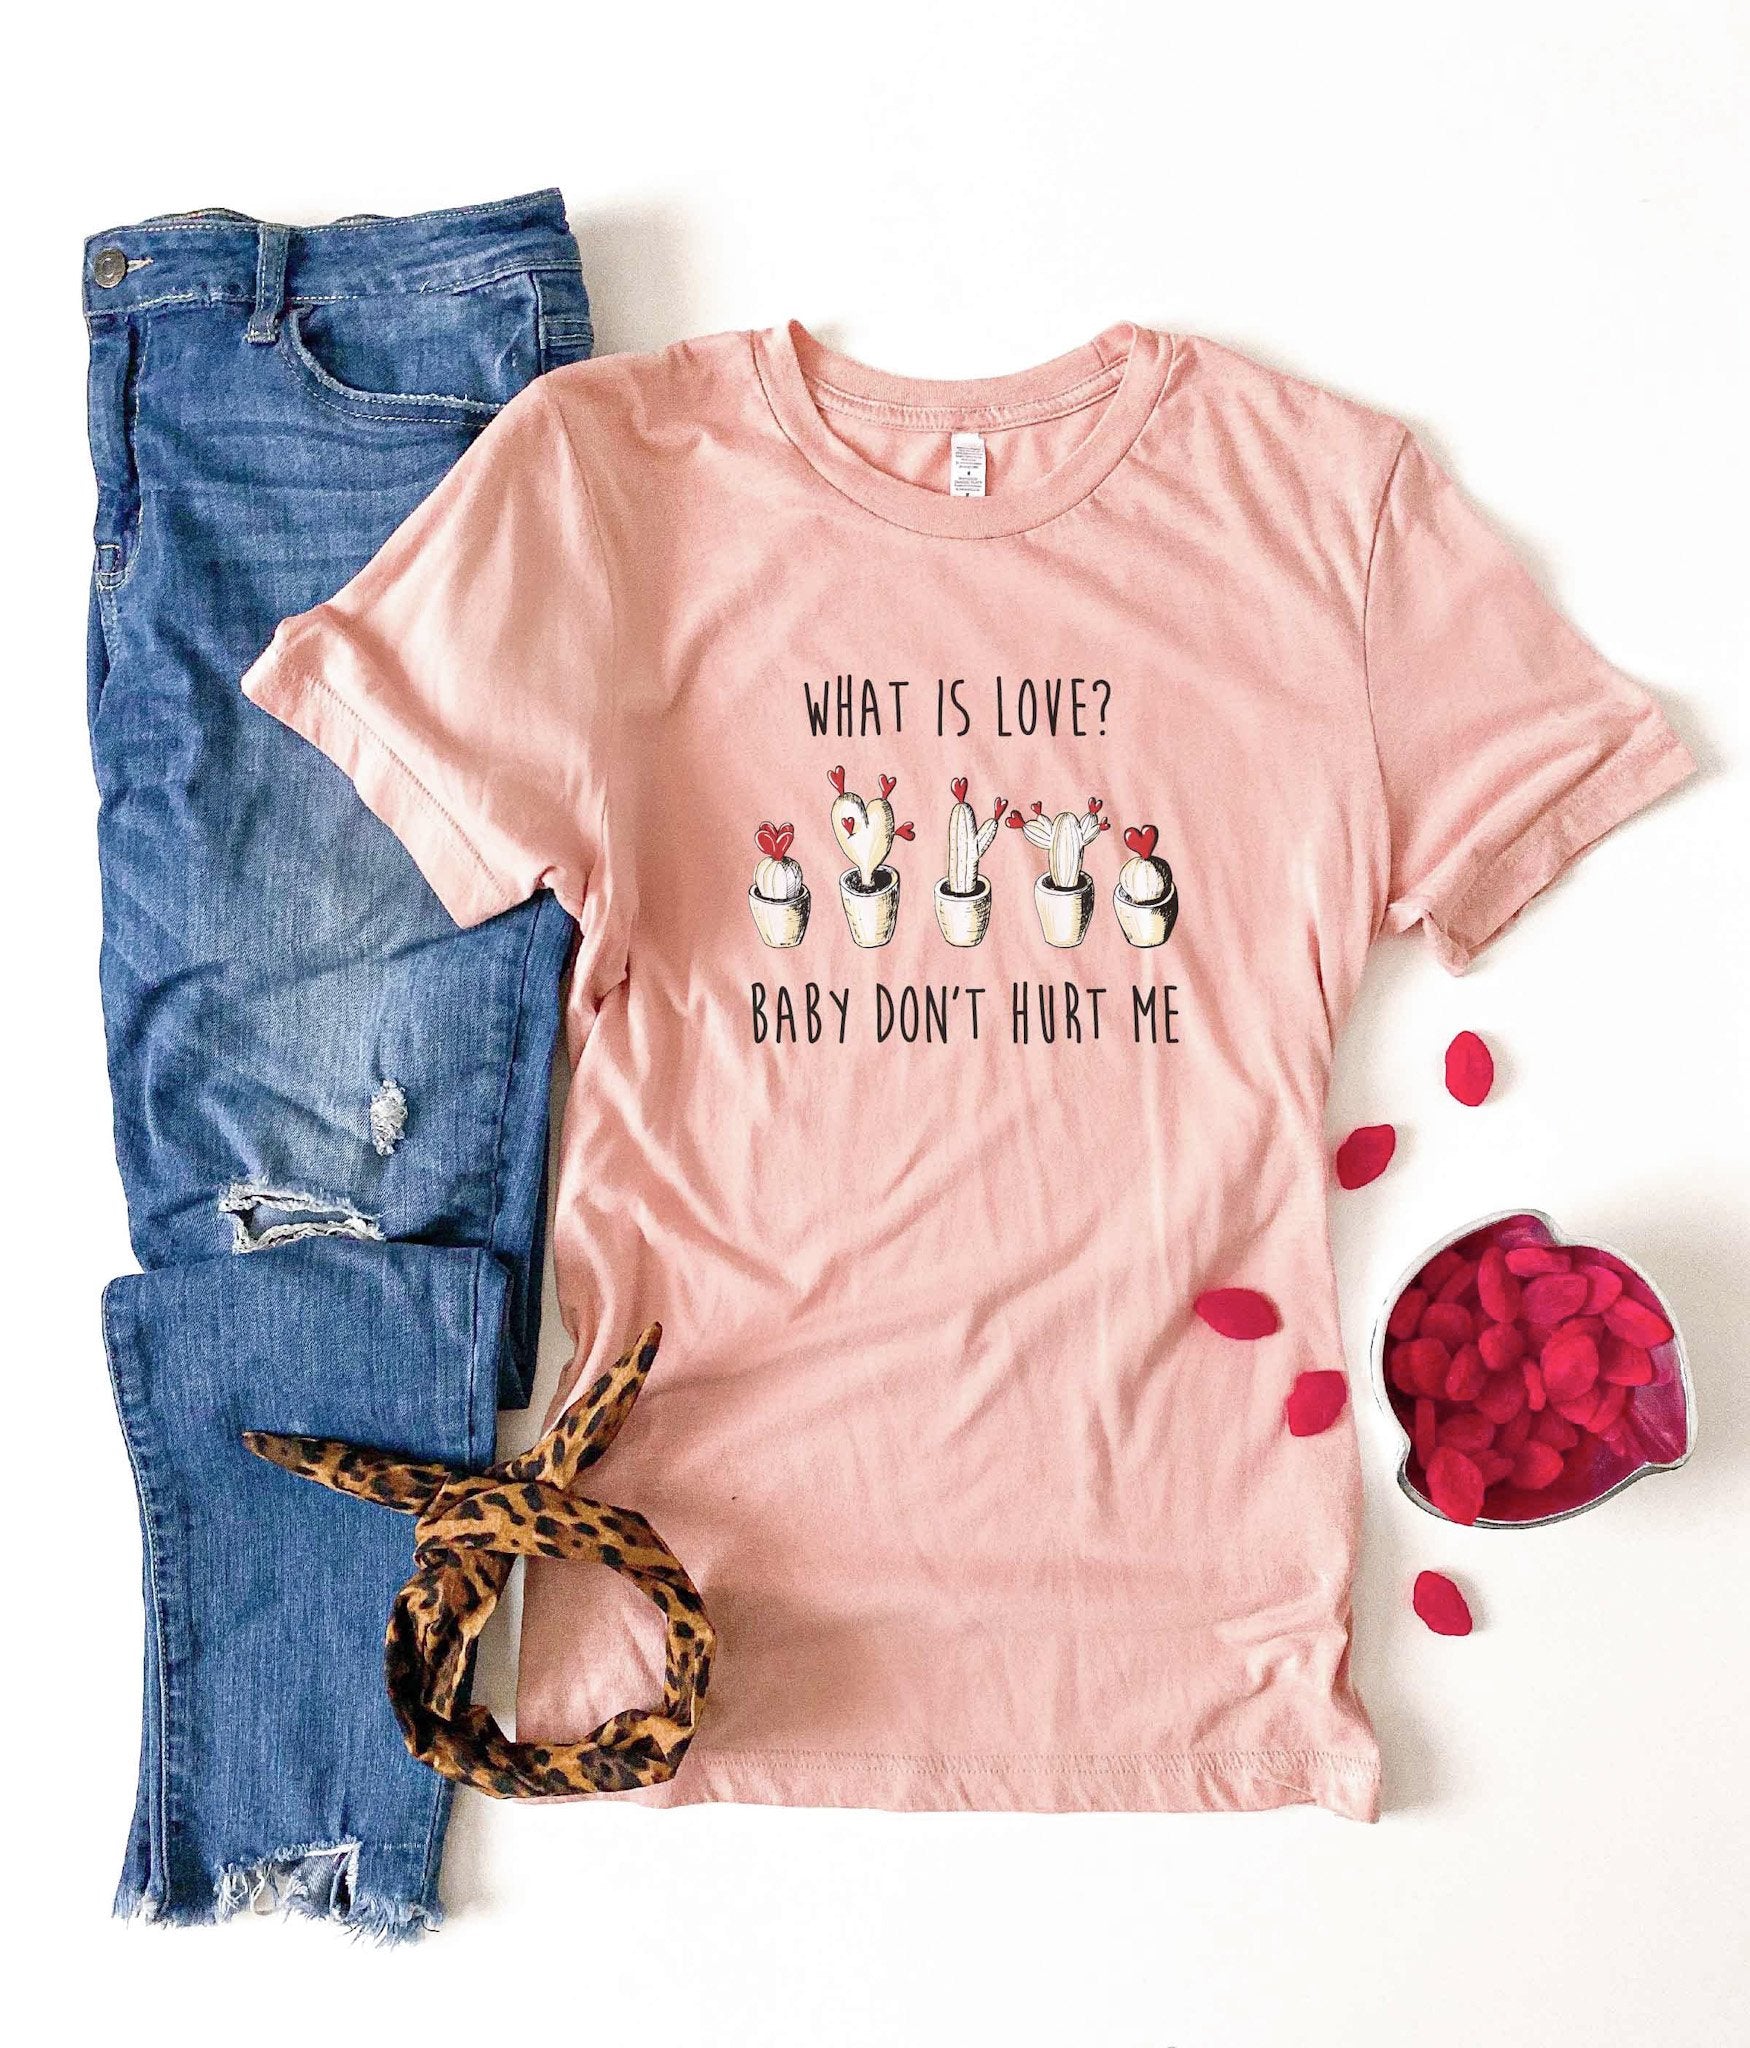 What is love tee Short sleeve valentines day tee Bella Canvas 3001 heather peach 